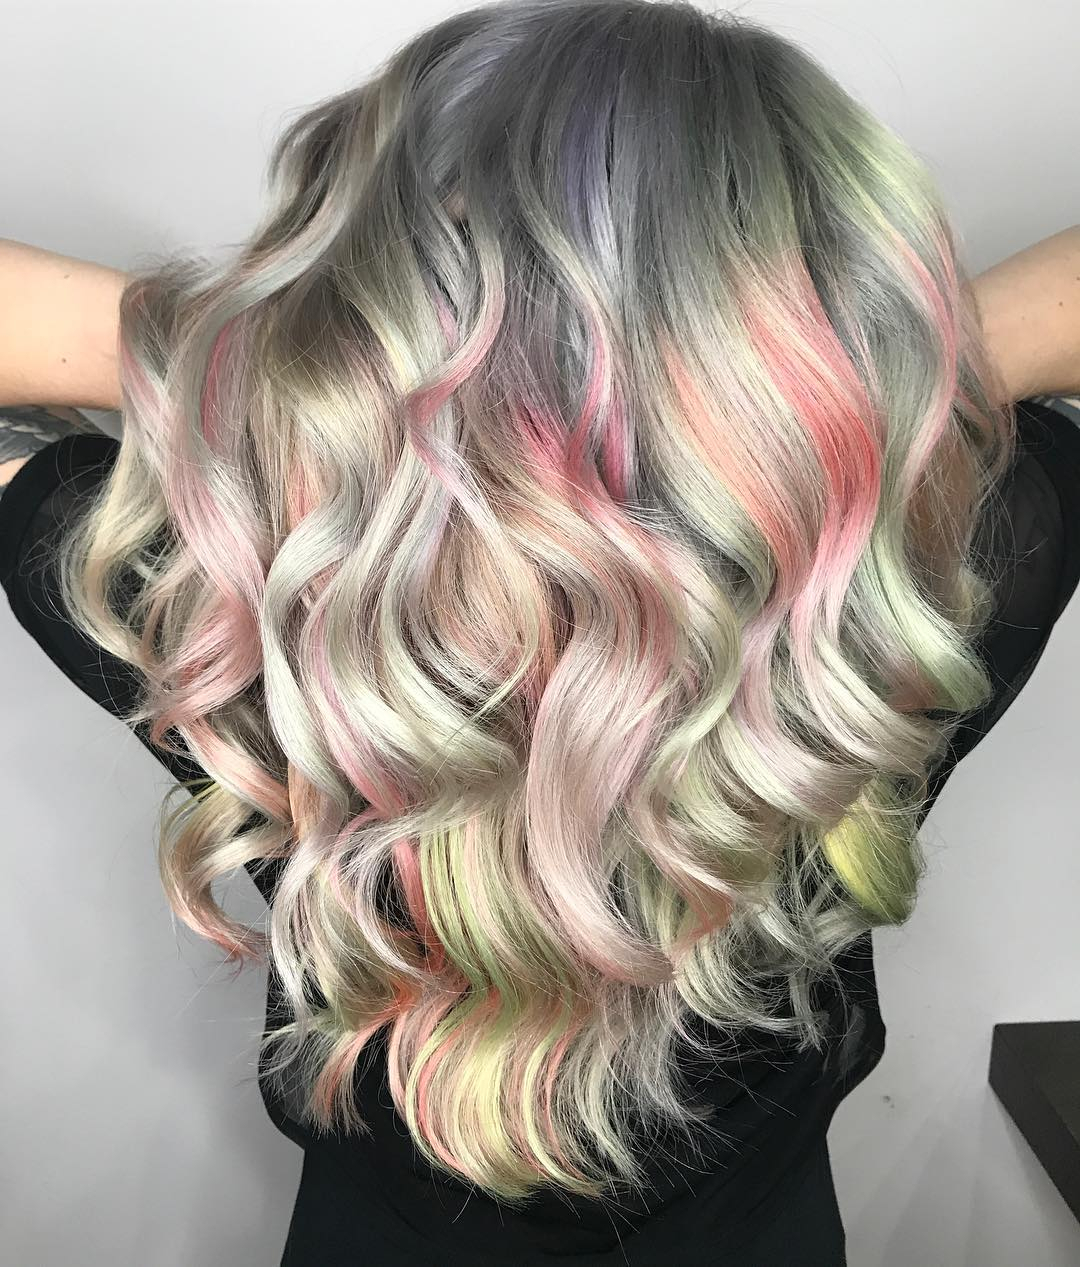 10 Unique Haircut And Color Ideas For Long Hair 2022